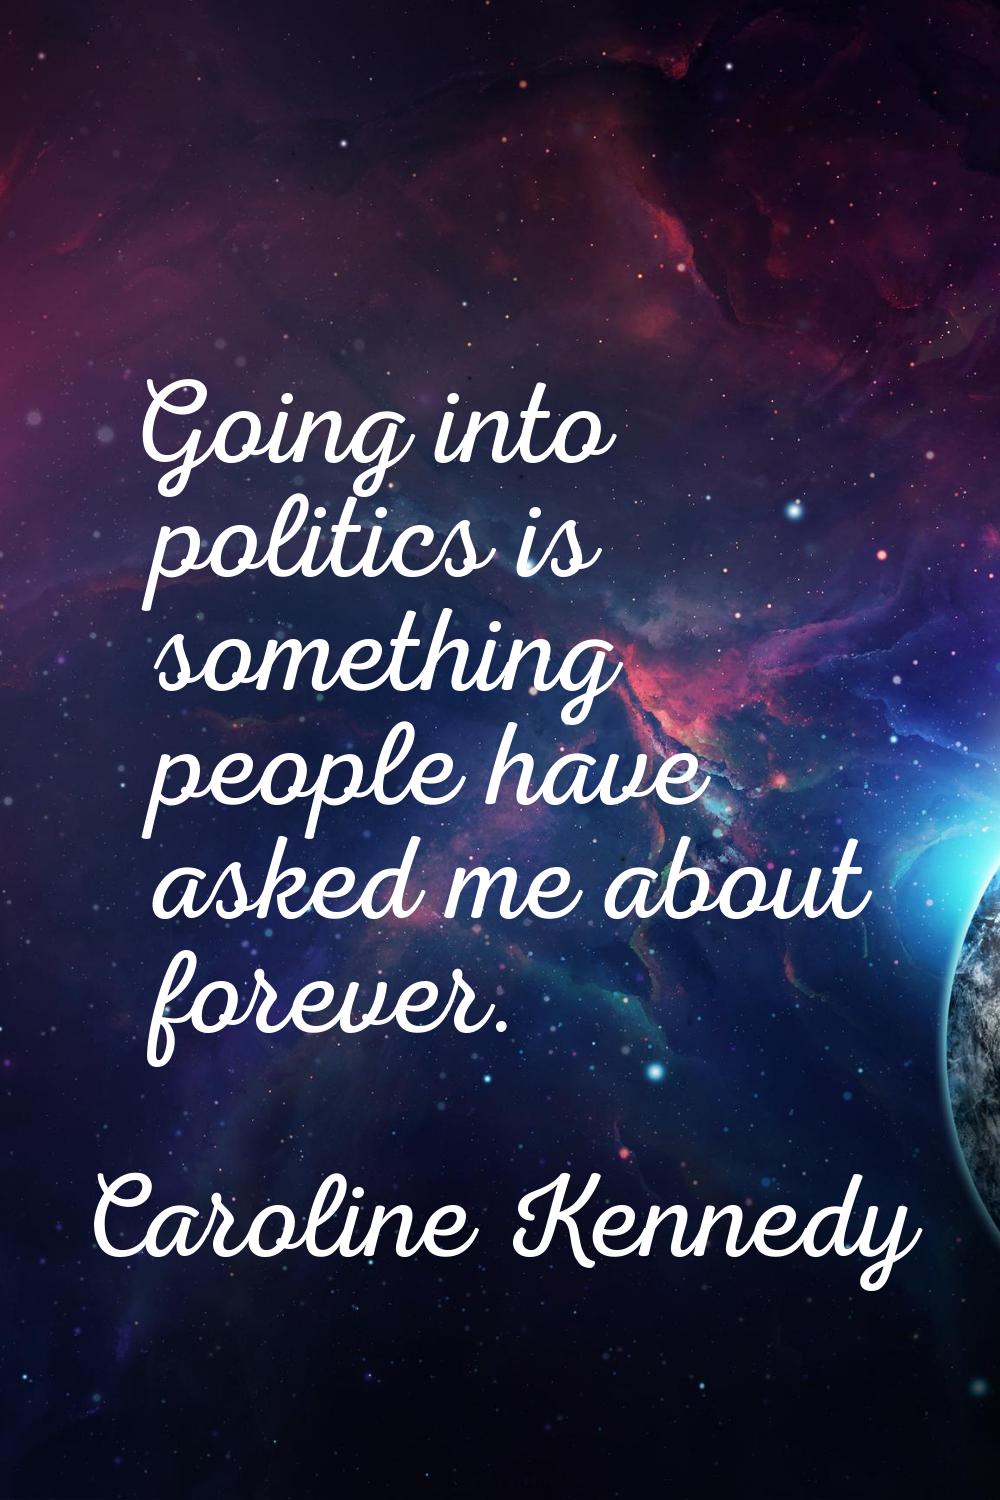 Going into politics is something people have asked me about forever.